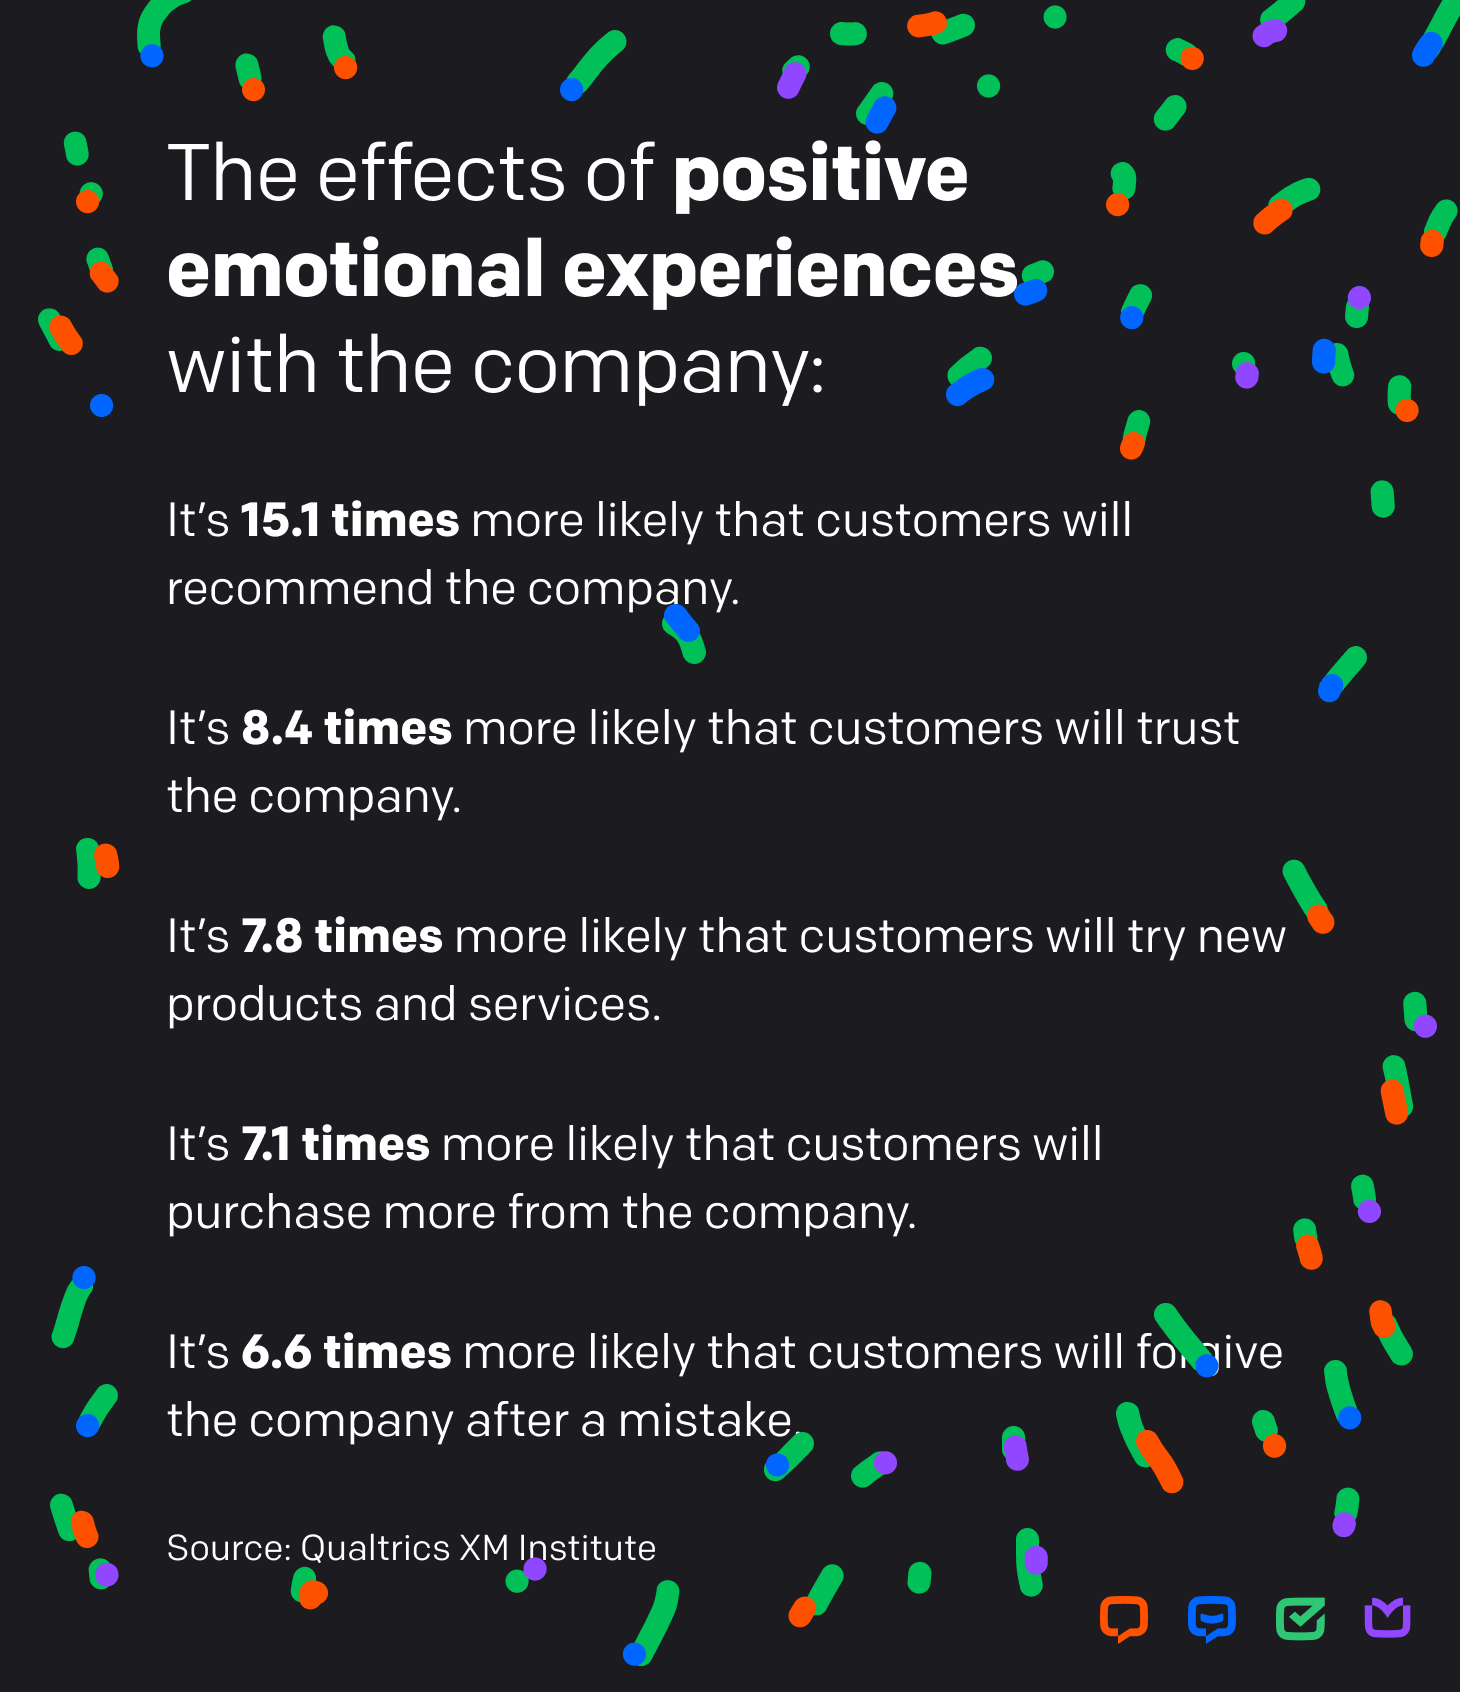 The characteristics of customers who had positive emotional experiences.